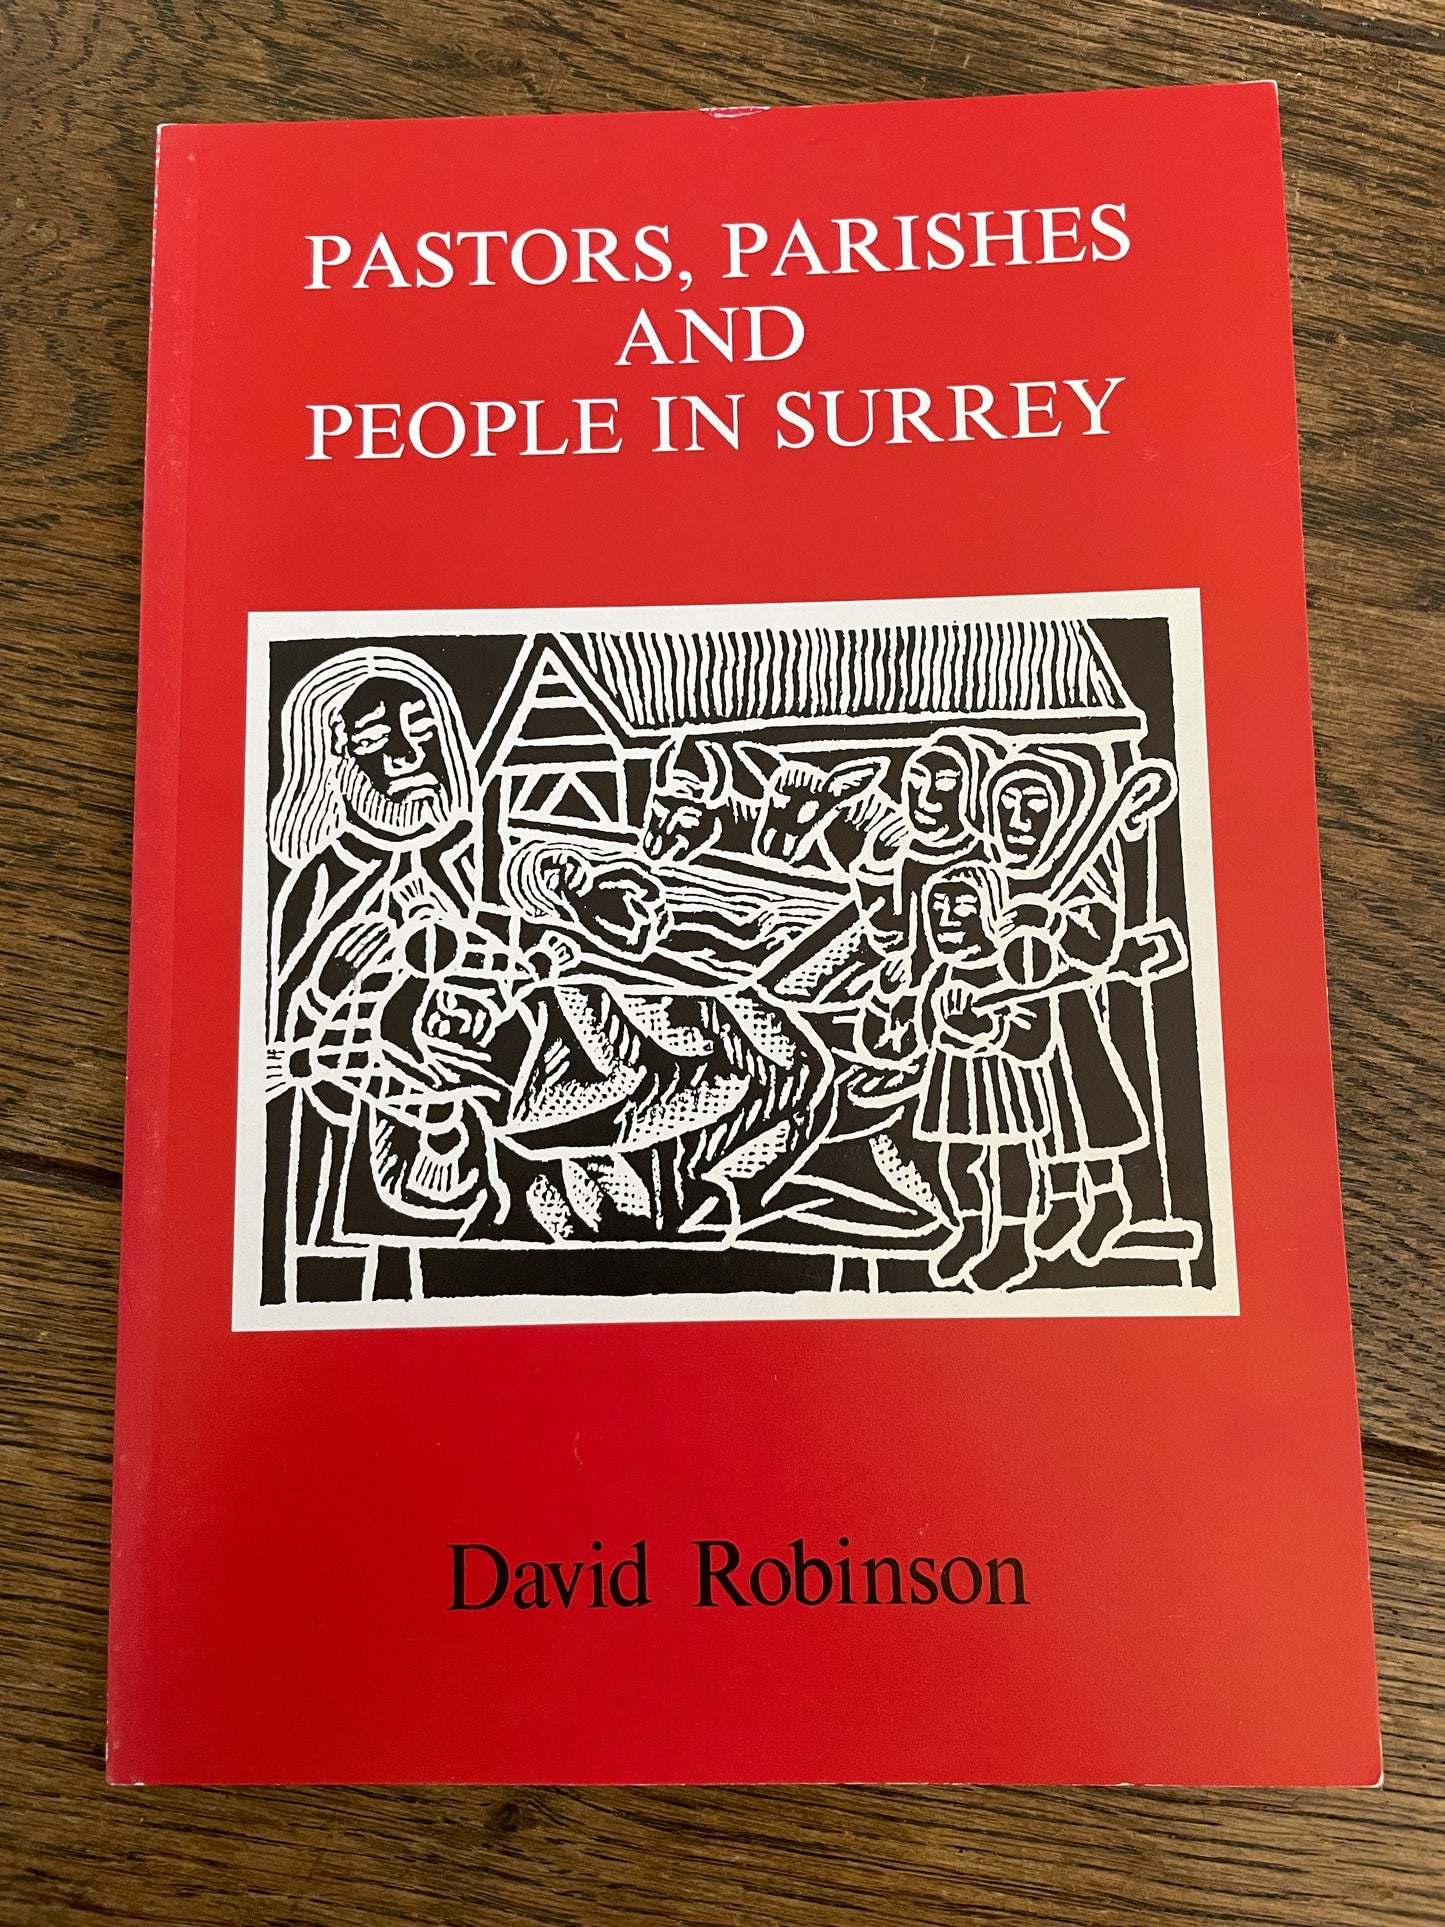 Pastors, Parishes and People in Surrey by David Robinson